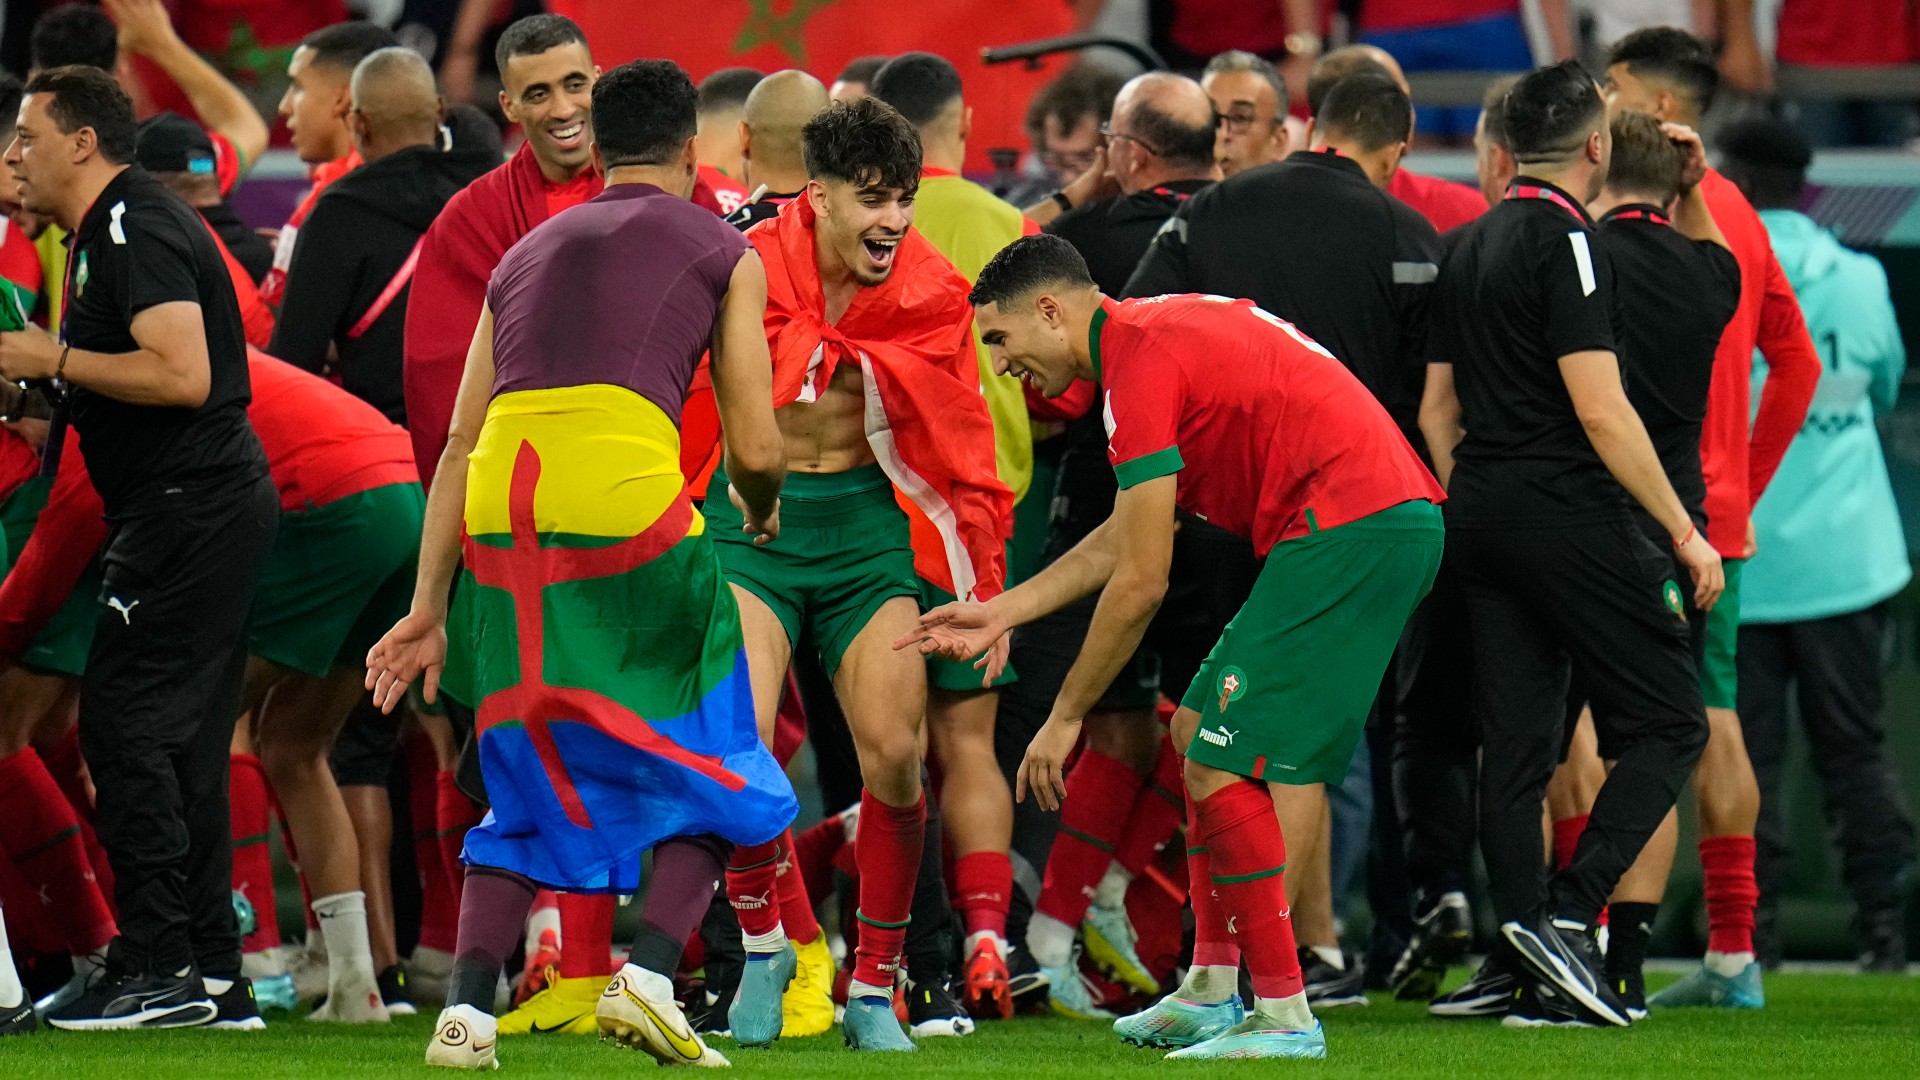 Morocco's reserve goalkeeper Munir Mohamedi can be seen with Amazigh flag wrapped around his waist as the Moroccan players celebrate their win against Spain at the Education City Stadium in Al Rayyan, on 6 December 2022 (Associated Press)